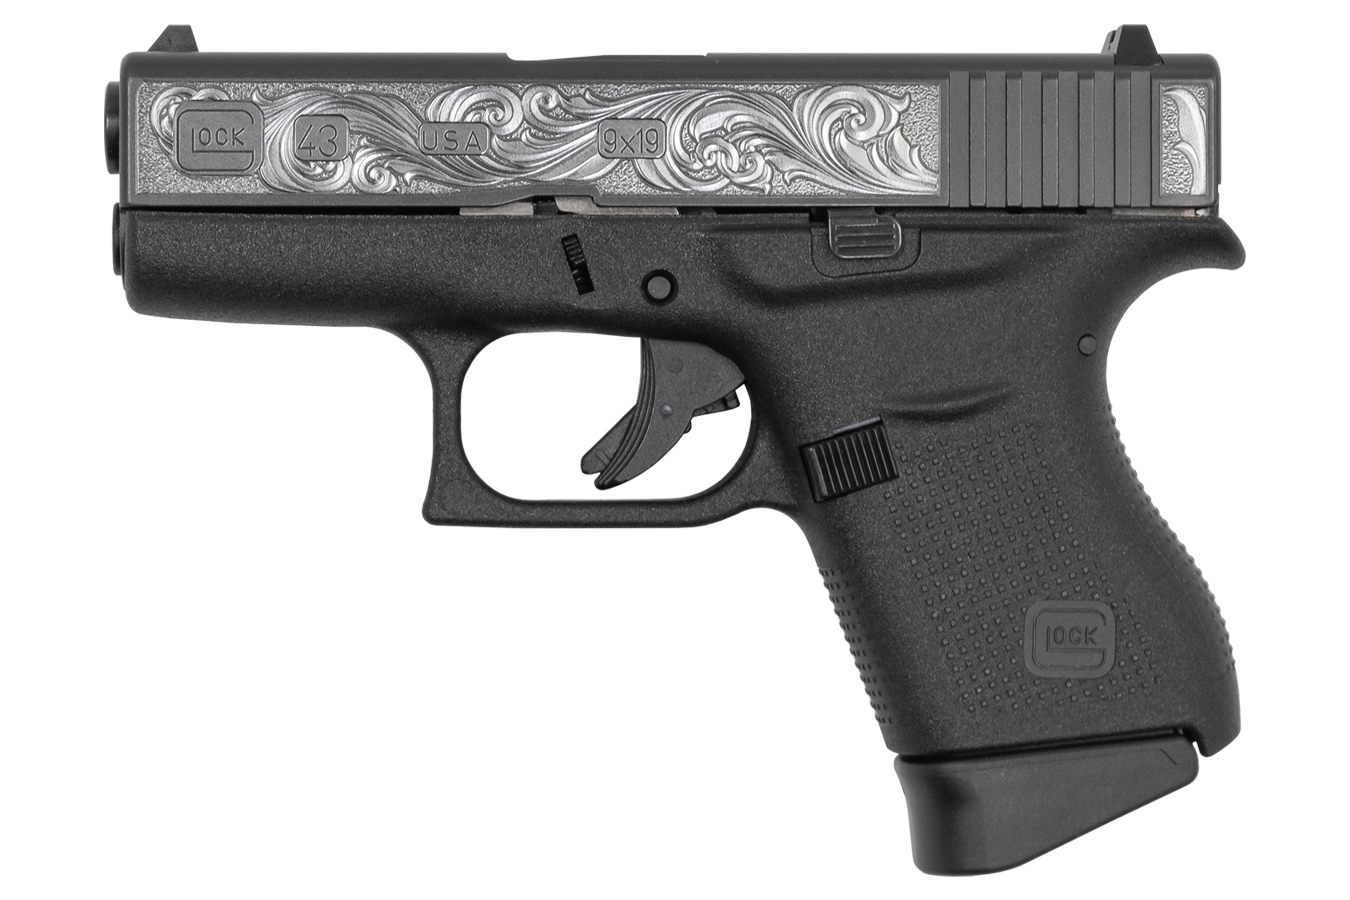 GLOCK 43 9MM SINGLE STACK PISTOL WITH CUSTOM ENGRAVED SLIDE (MADE IN THE USA)